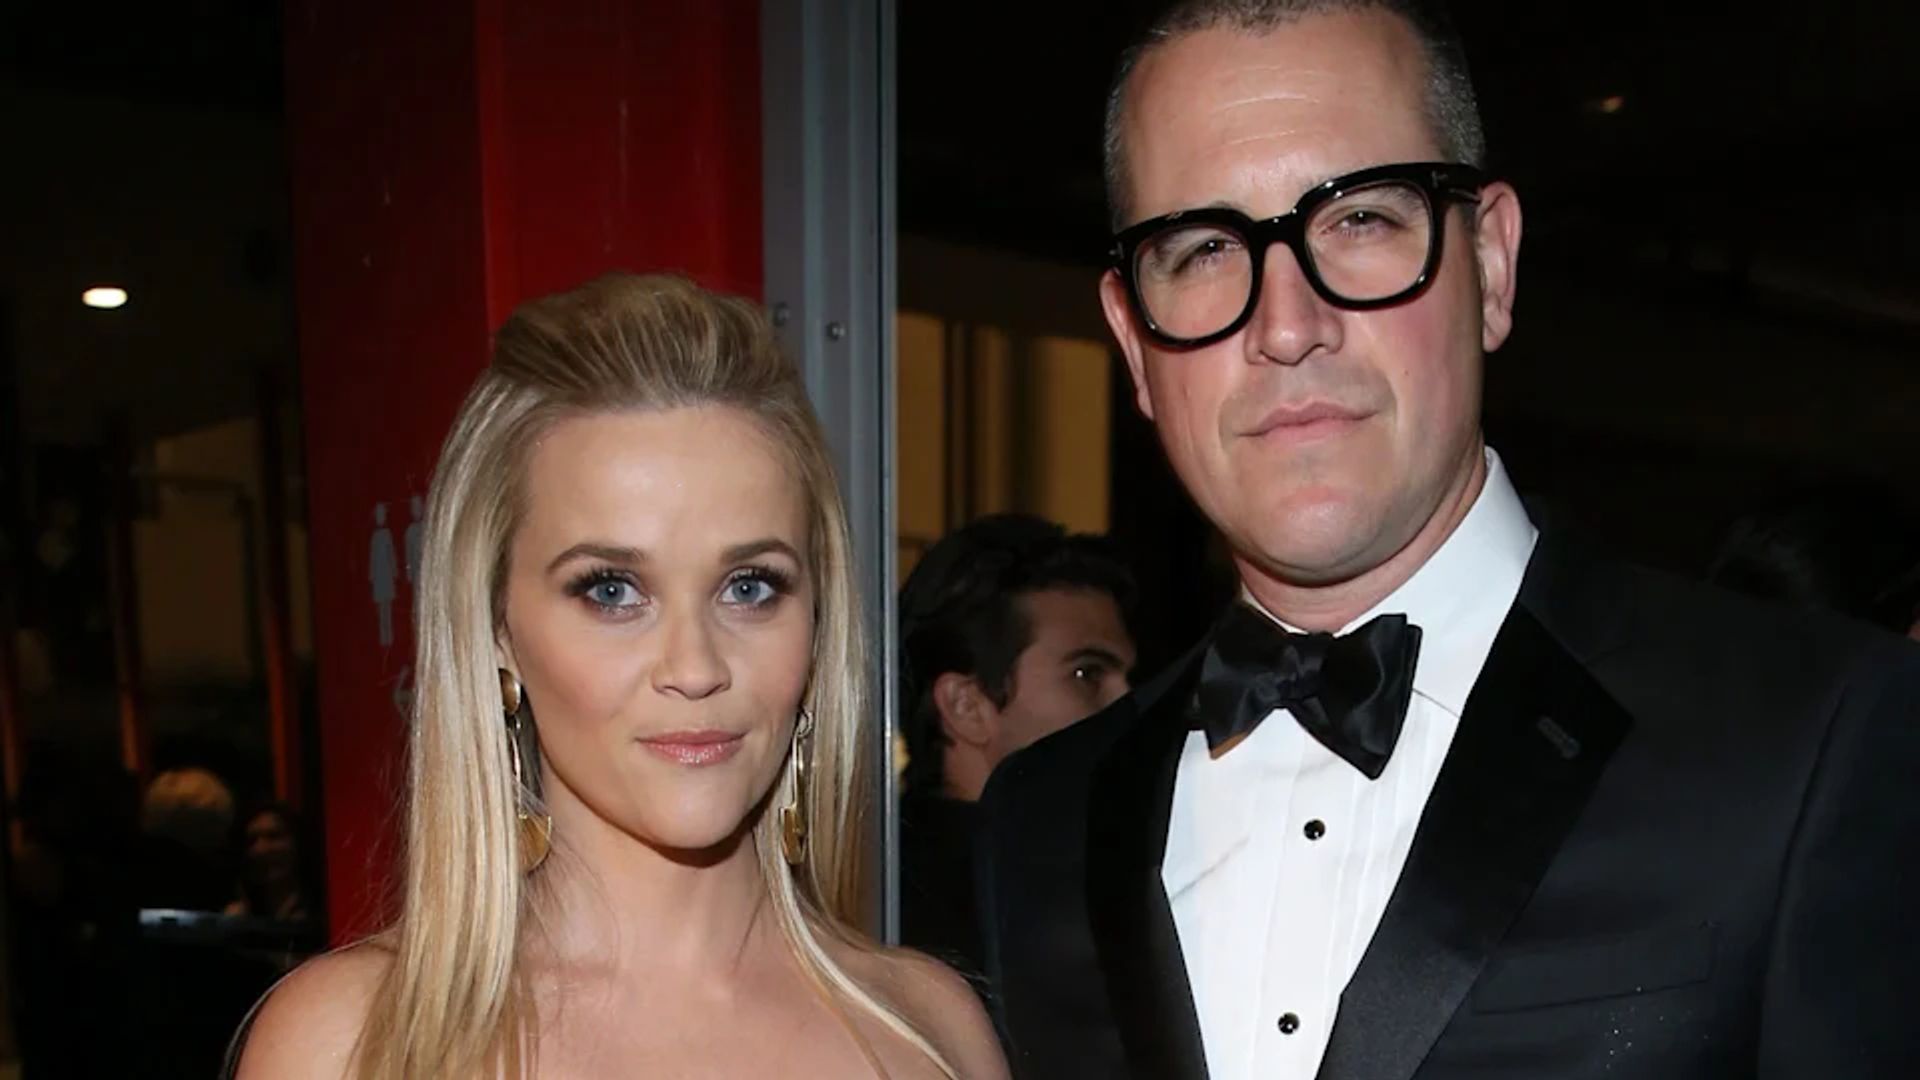 Reese Witherspoon's struggle announcing split from husband Jim Toth revealed after actress reunited with ex Ryan Phillipe